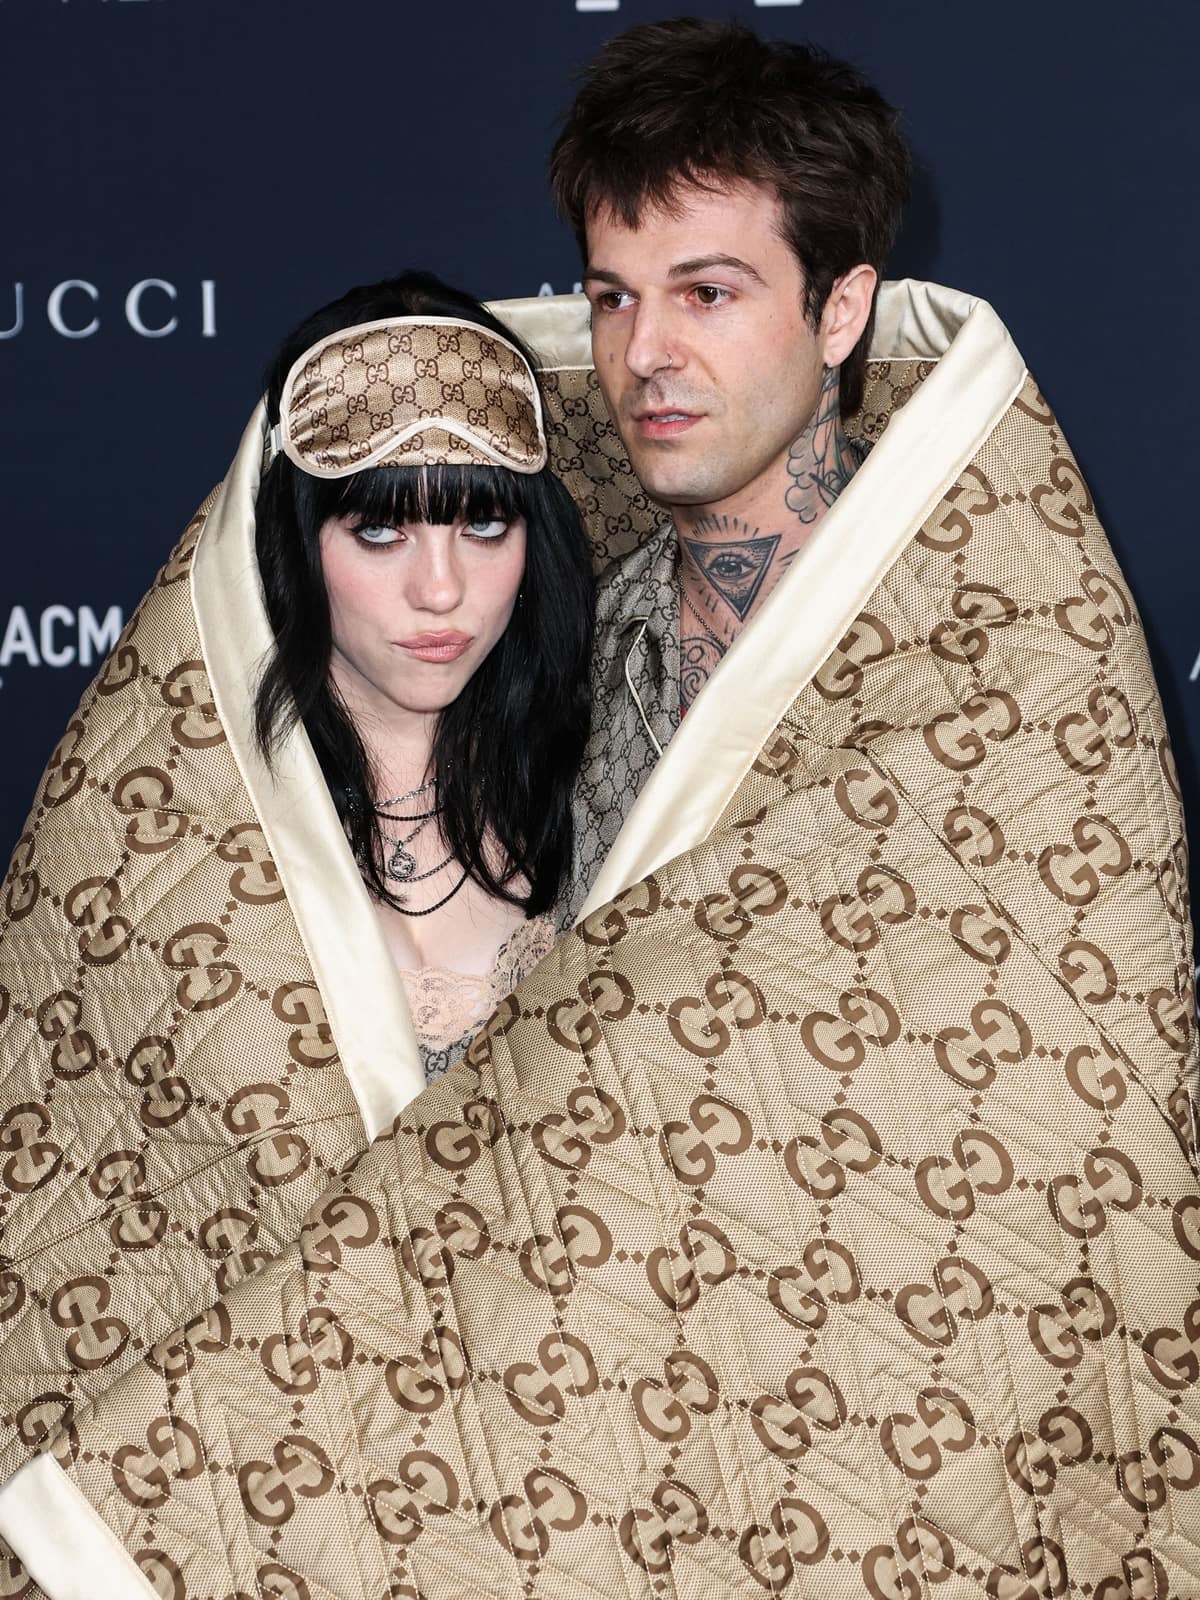 Billie Eilish and Jesse Rutherford, who have an 11-year age gap between them, first met in 2017